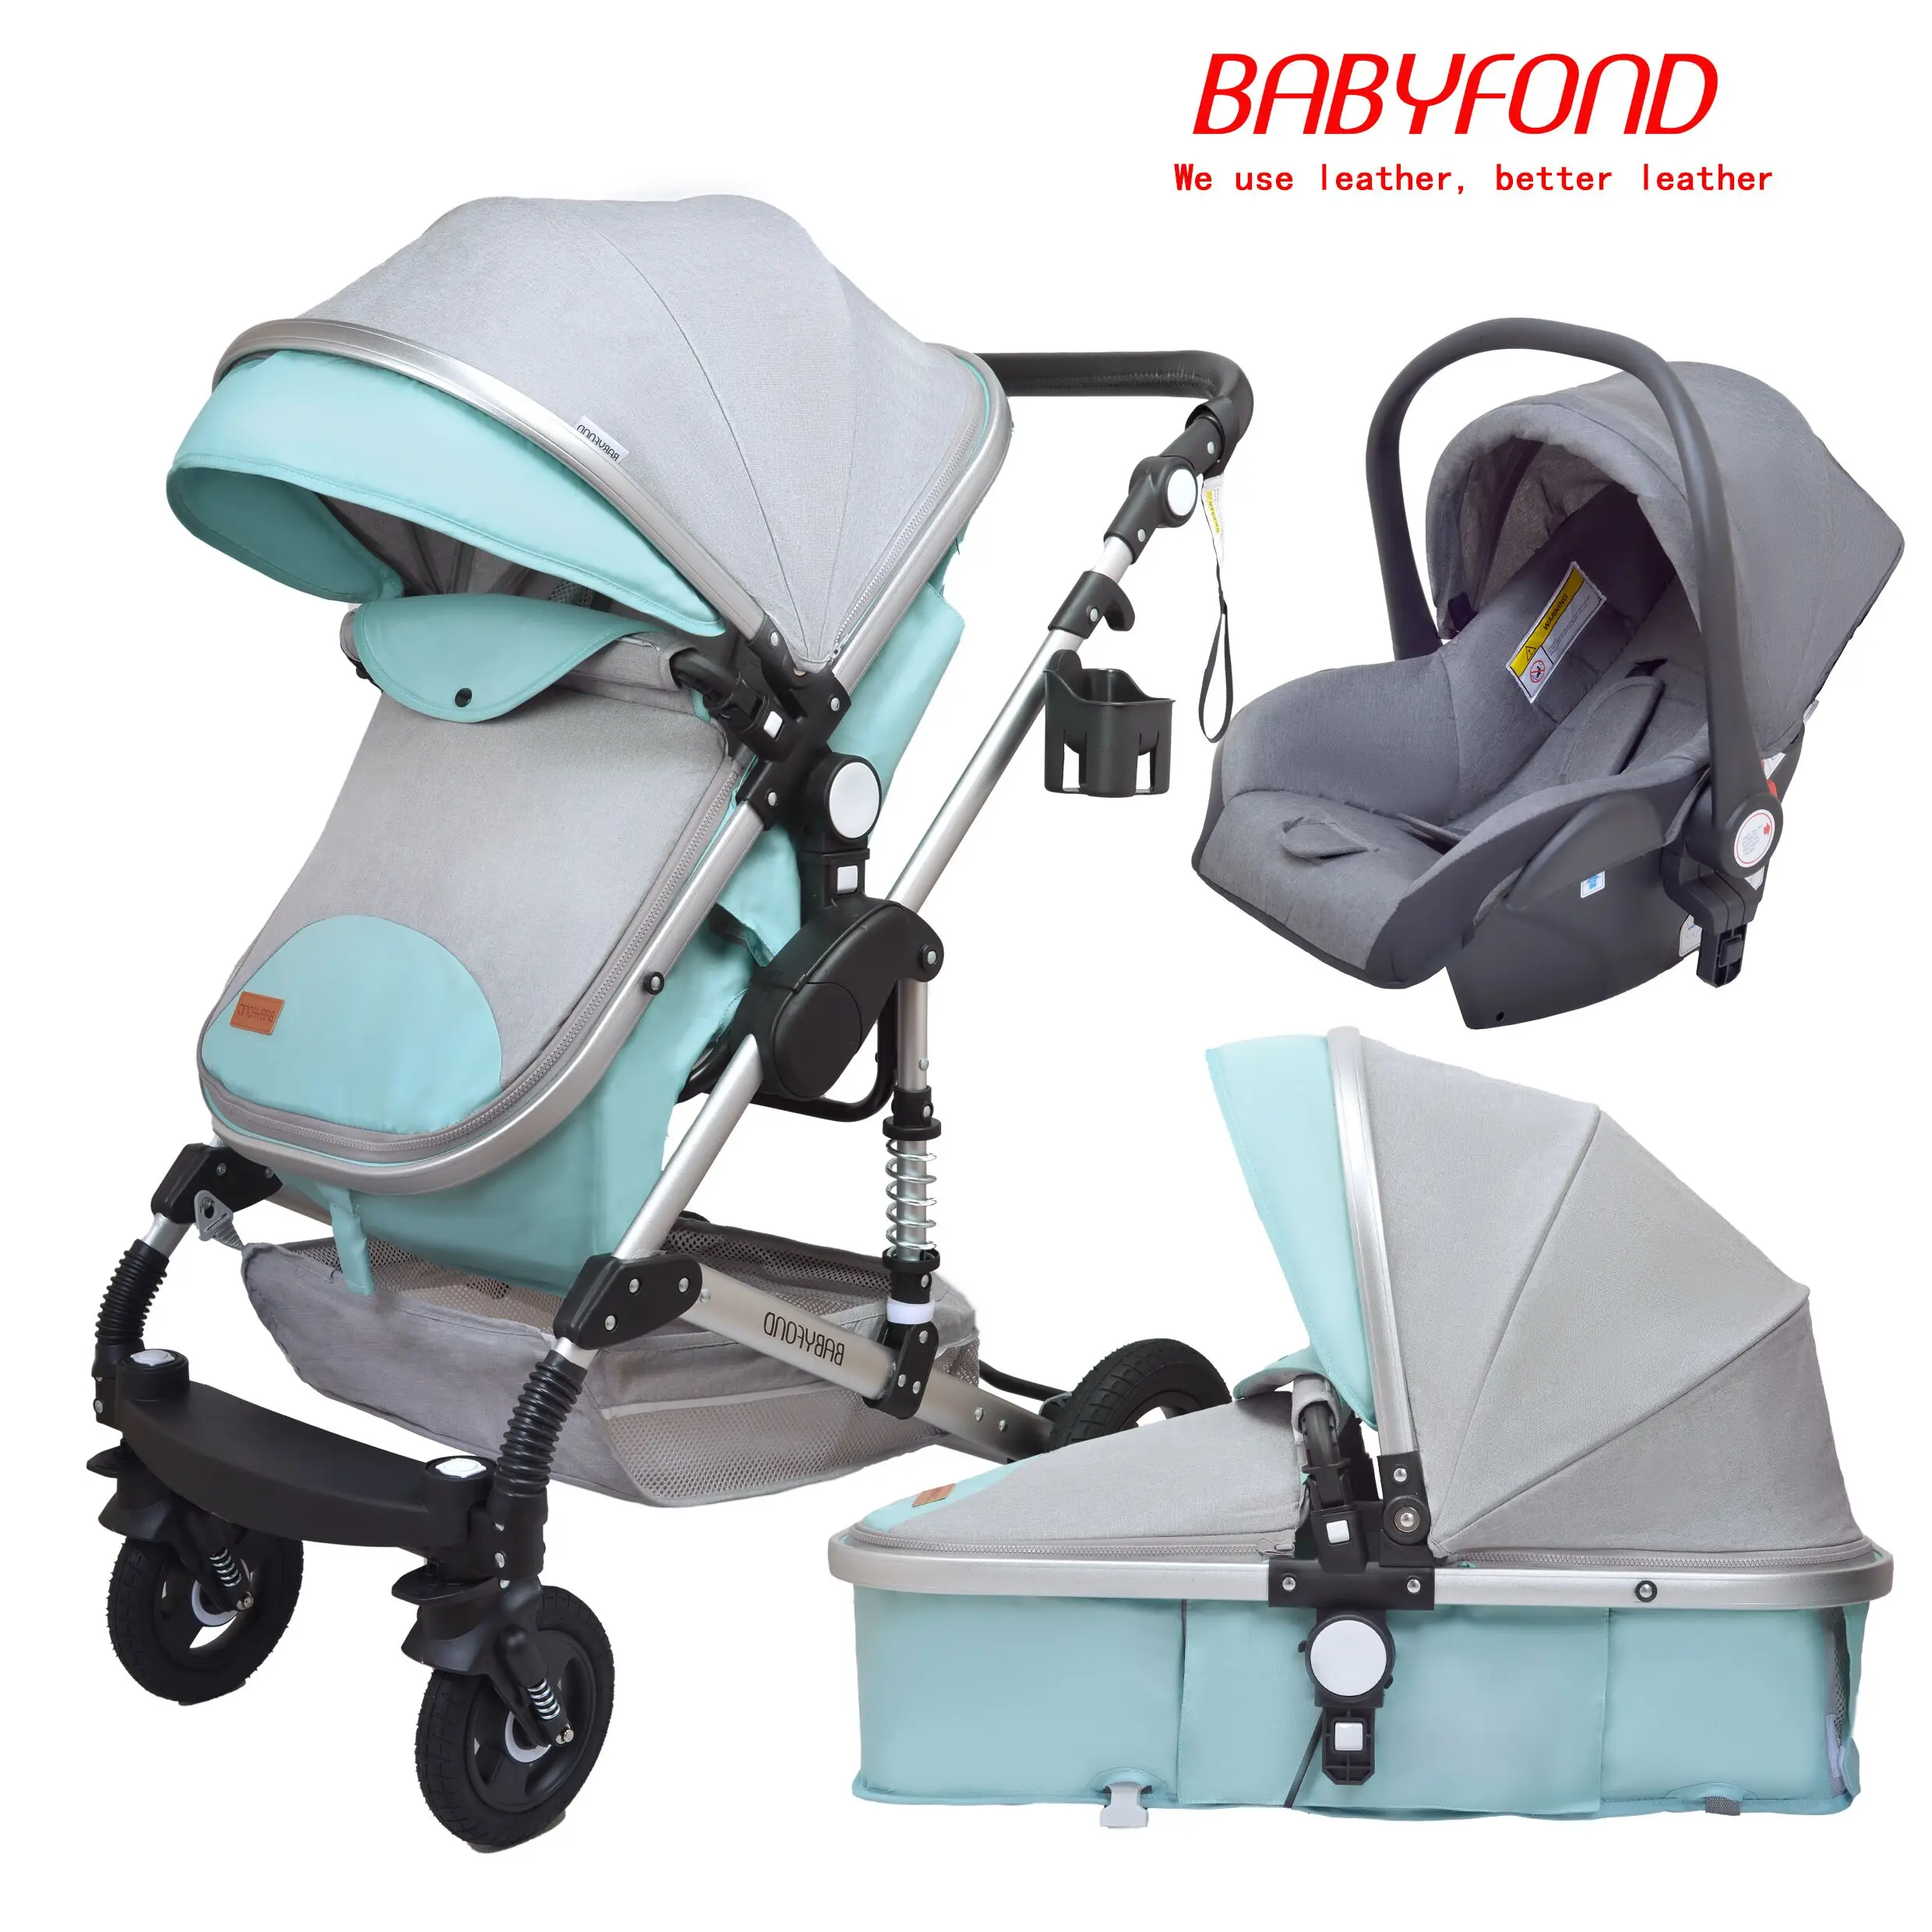 

Baby Stroller 3 in 1 Portable Travel Baby Carriage New born Luxurious High Landscape Baby Car Babyfond